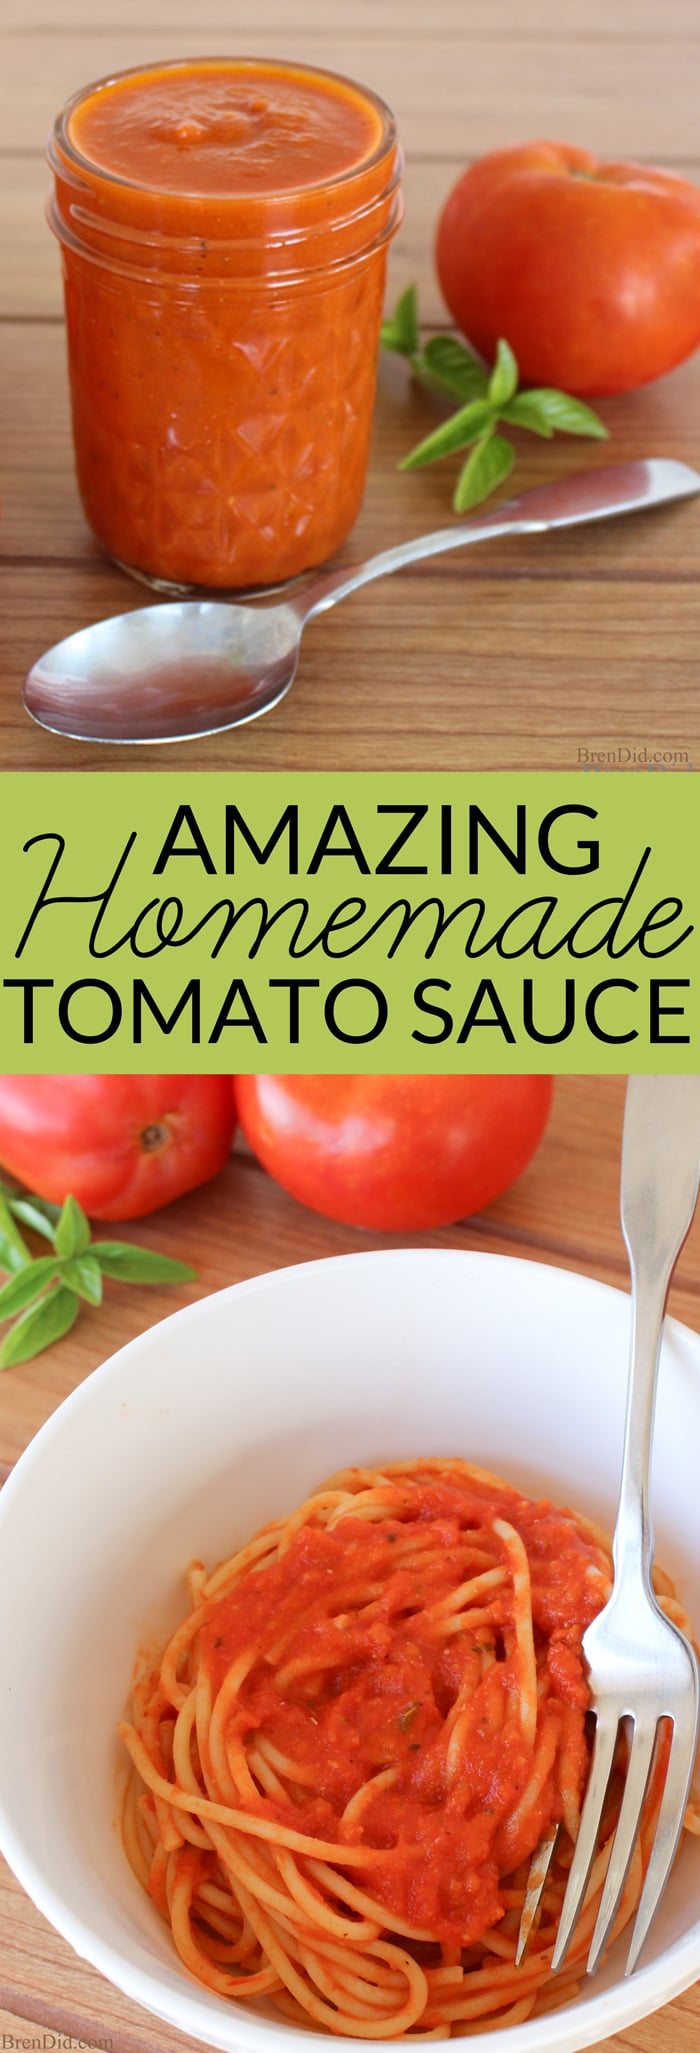 Amazing Tomato Sauce Recipe - This easy homemade tomato sauce uses a few basic ingredients and can be served over pasta, made into lasagna, or even used as pizza sauce.